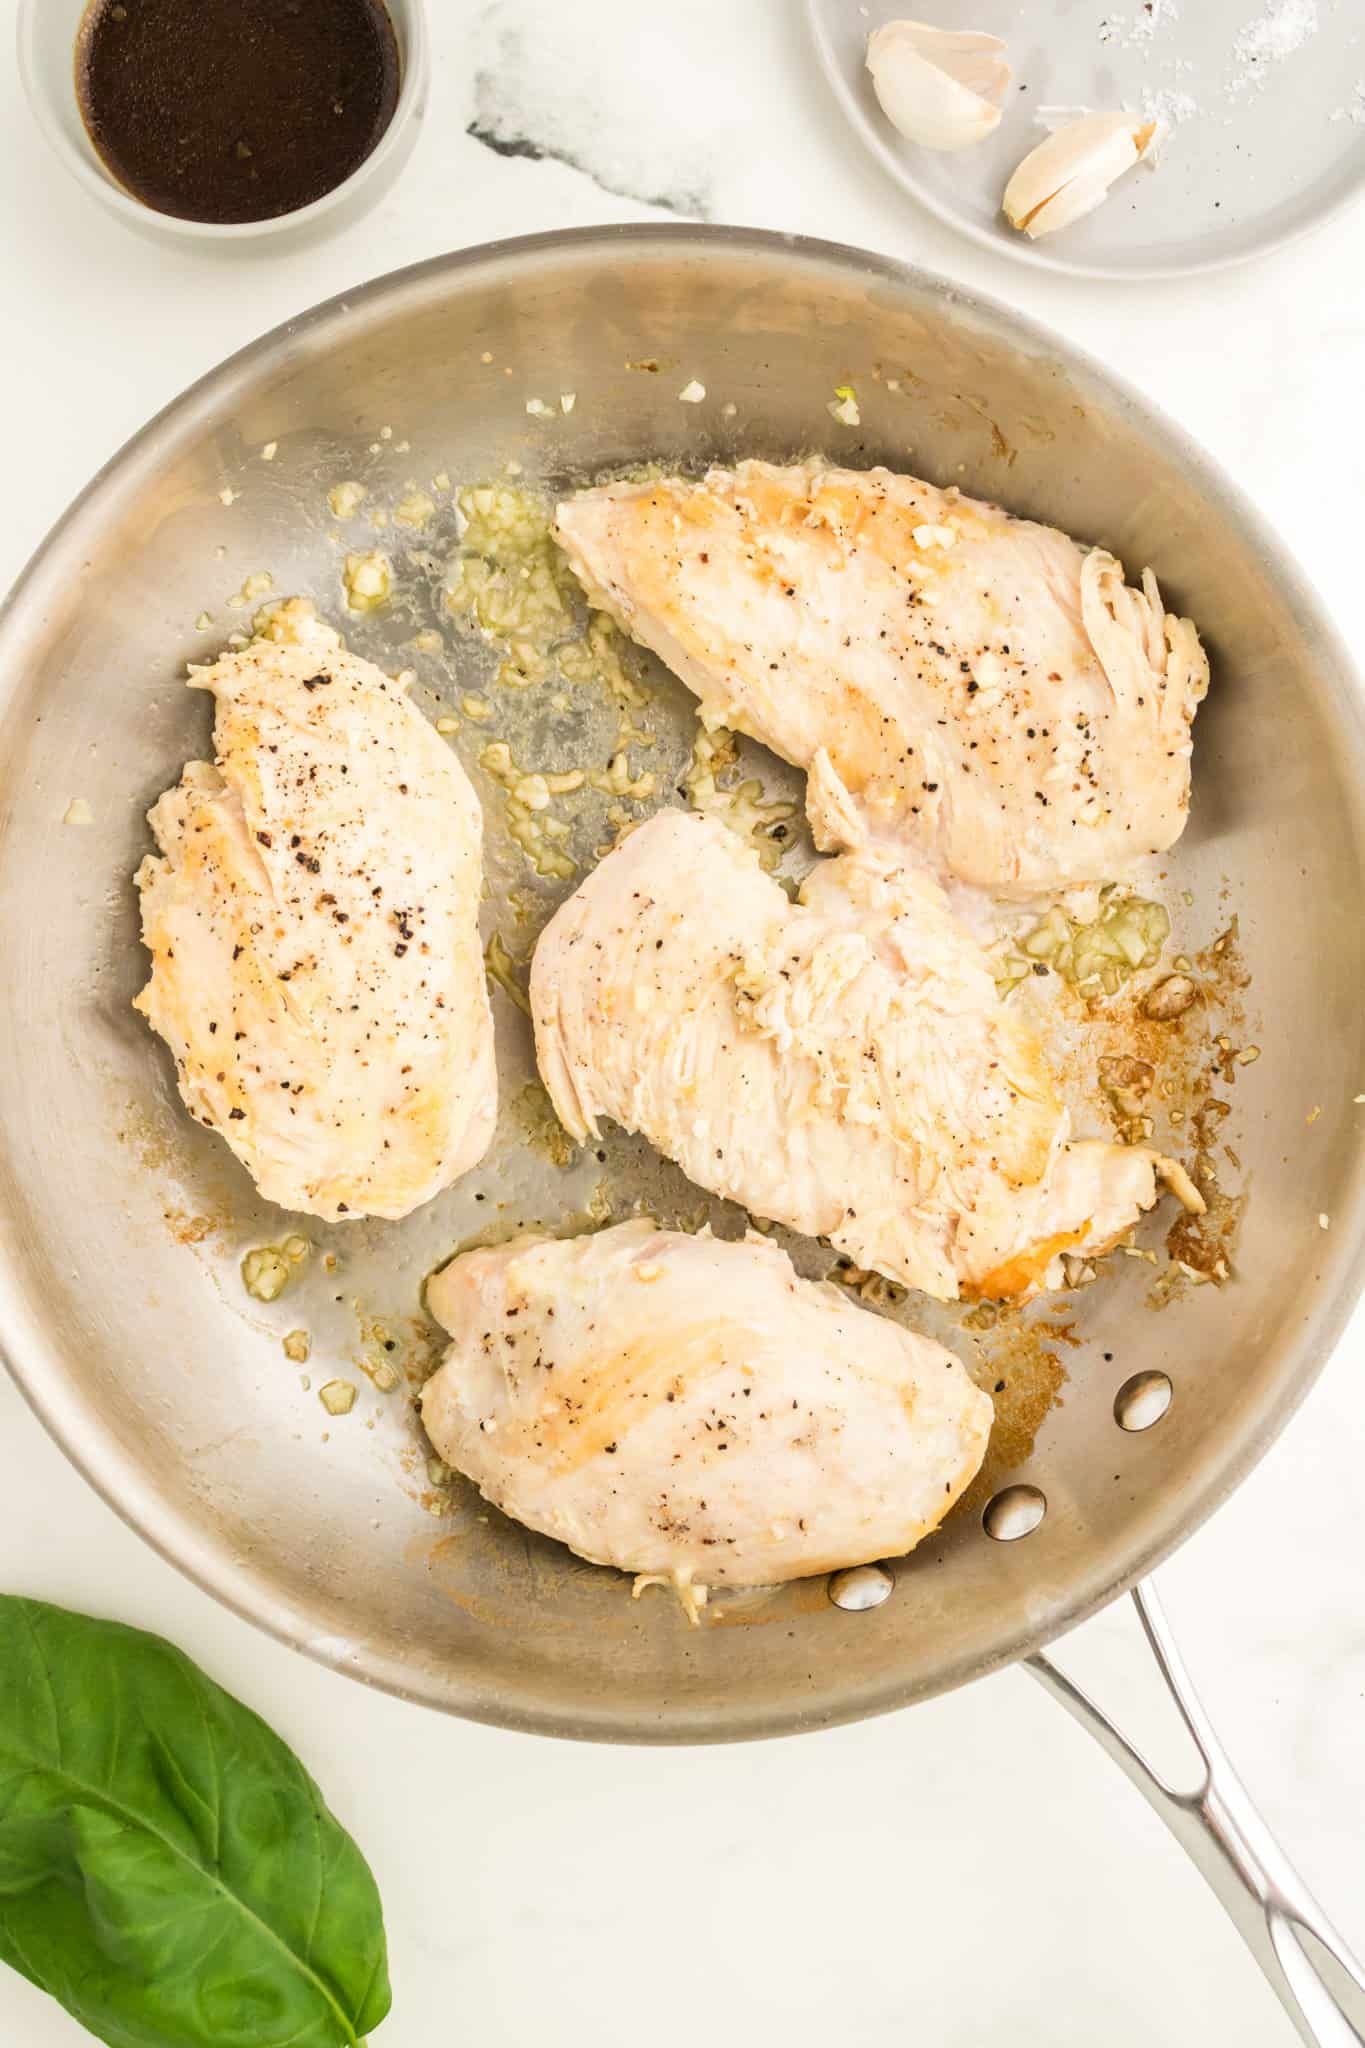 chicken breasts cooking in a skillet